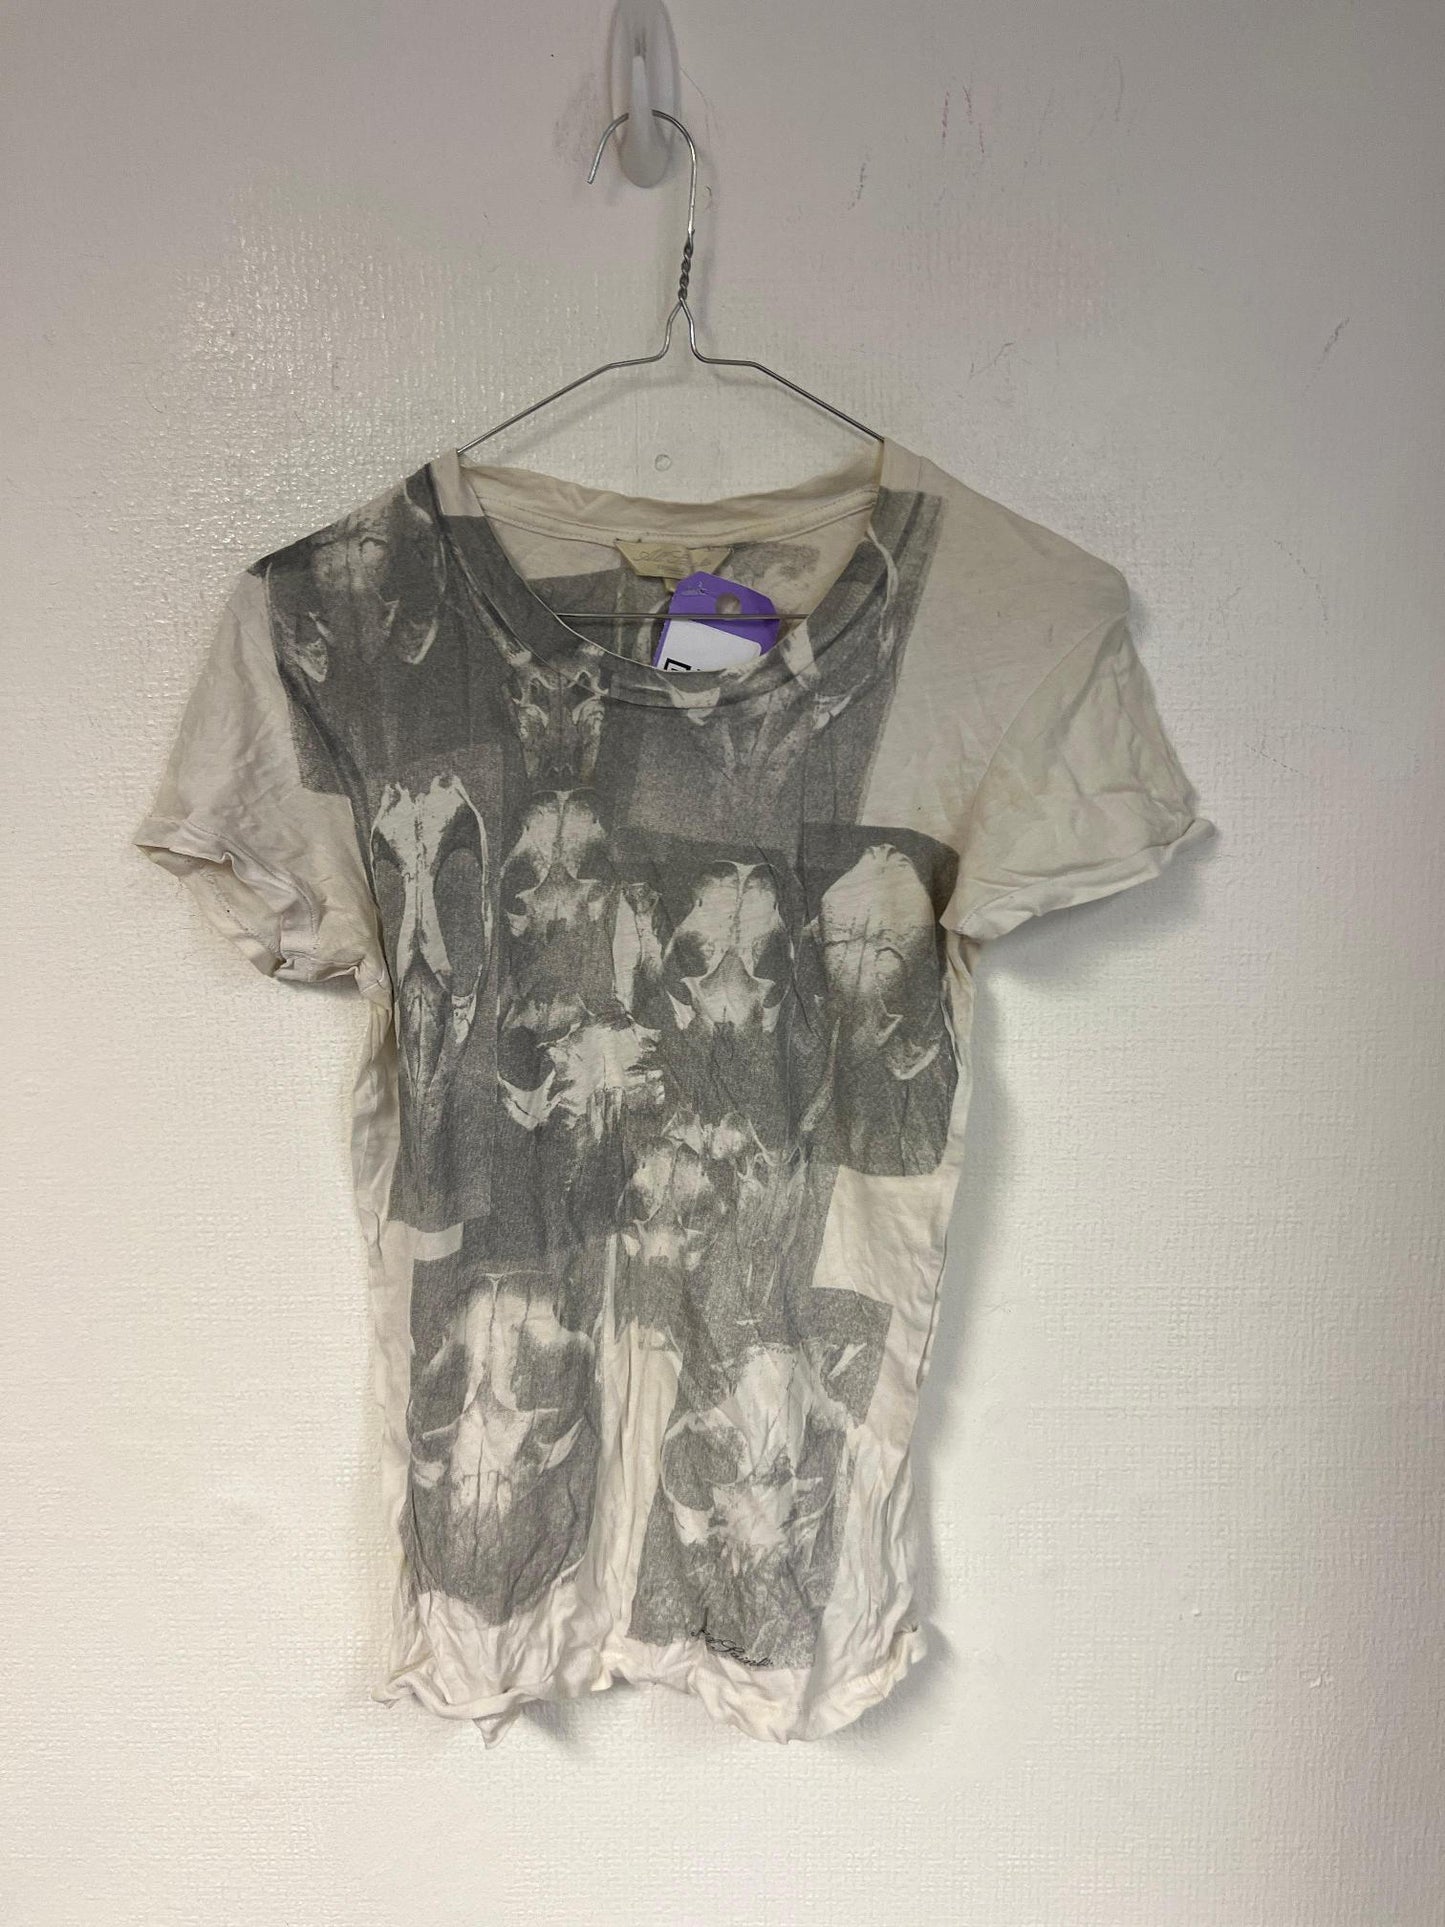 White and grey graphic top, size 4 - Damaged Item Sale